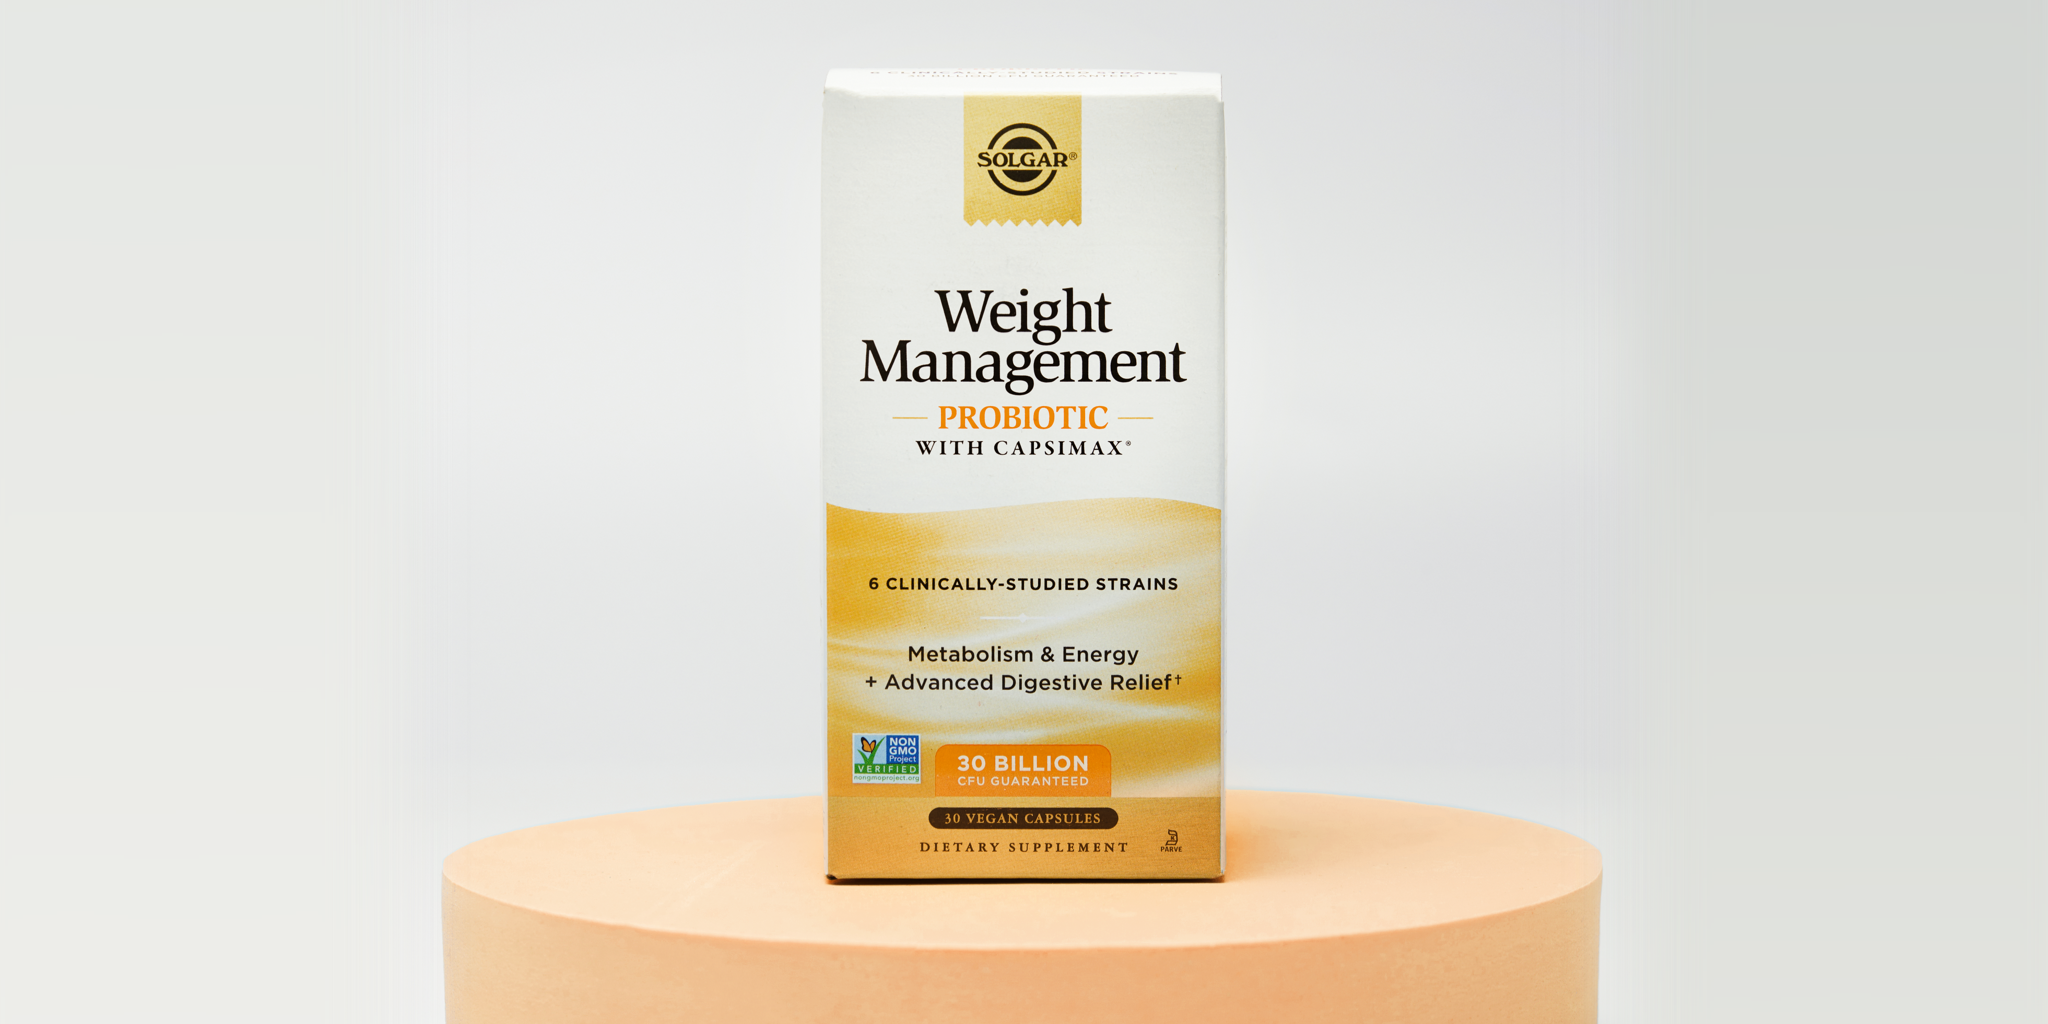 A box of Solgar Weight Management probiotic on top of an orange circular riser against a white background.